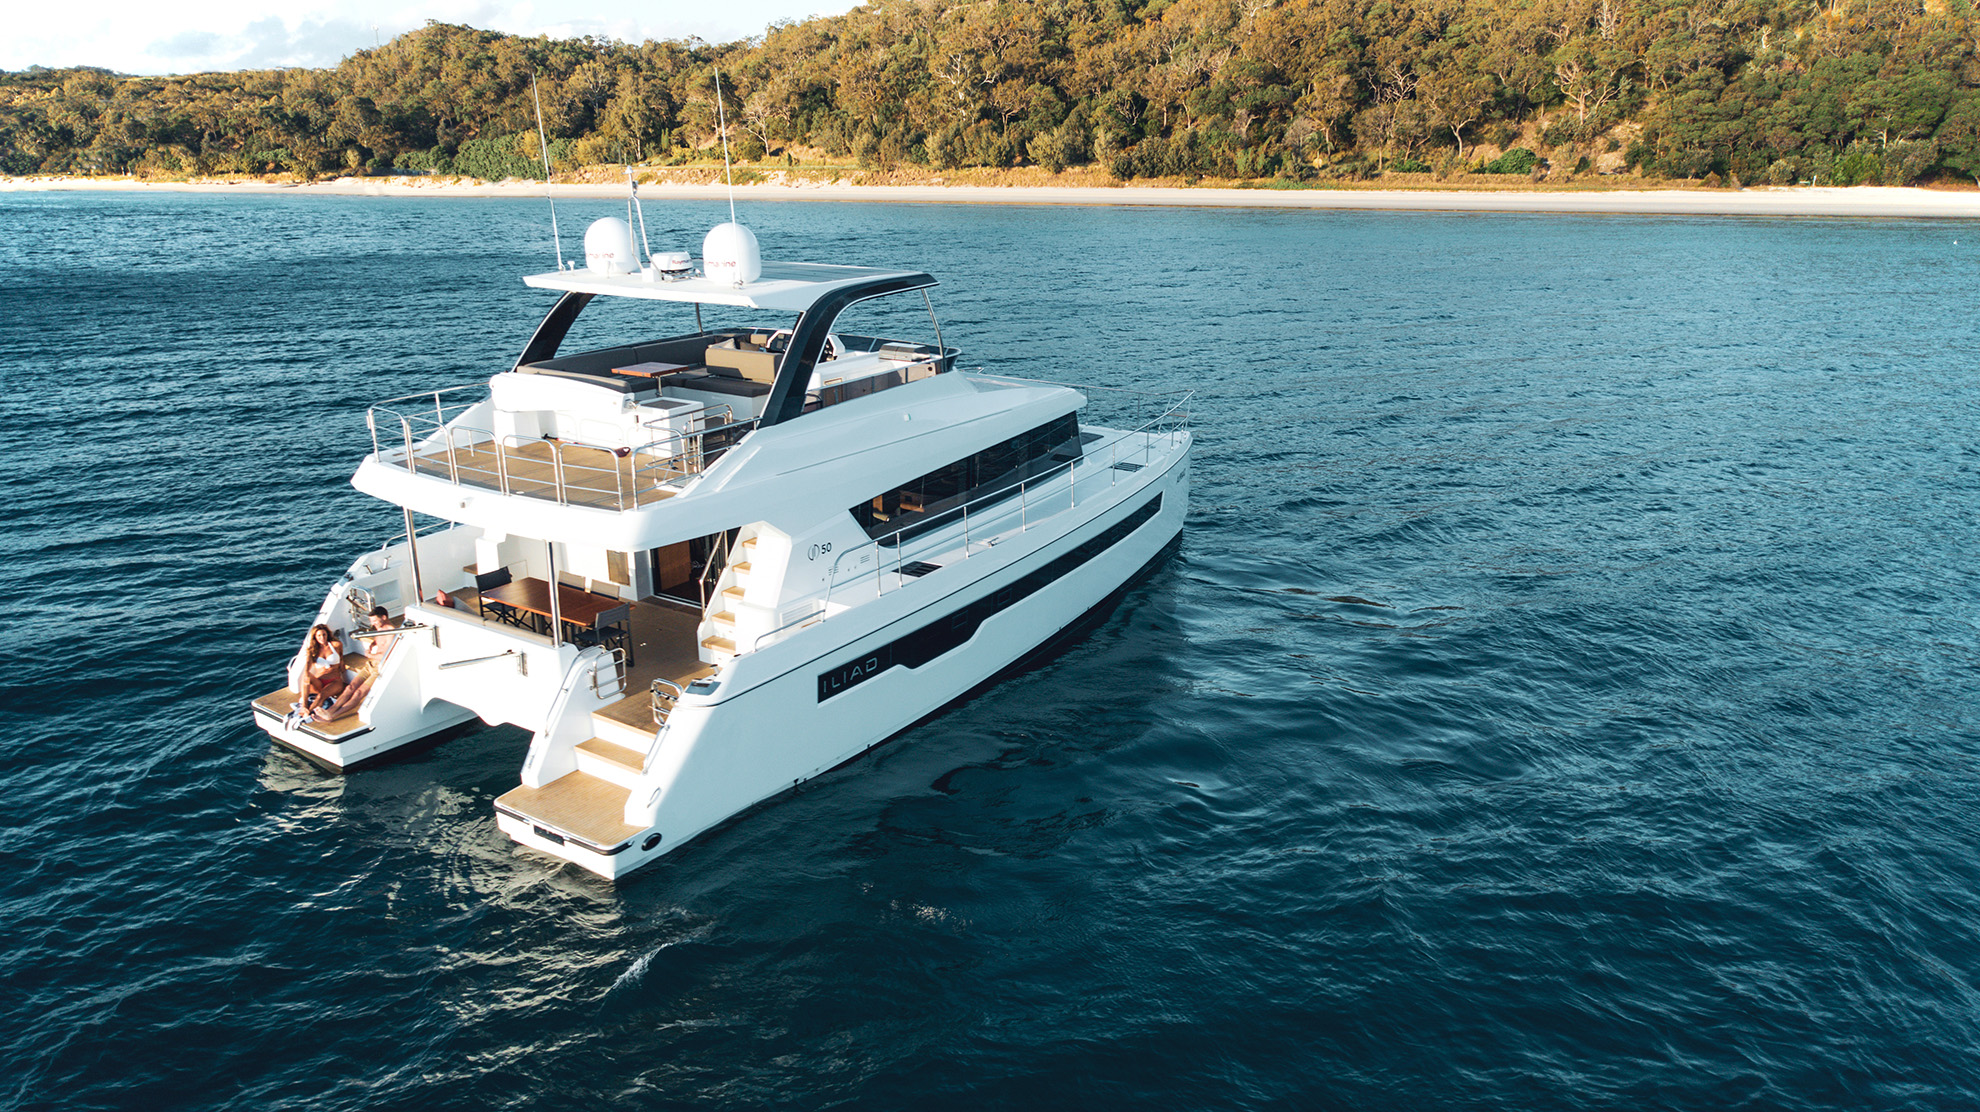 LIAD Catamarans will showcase the highly acclaimed ILIAD 50 at the 2023 Singapore Yachting Festival from 27 – 30 April.